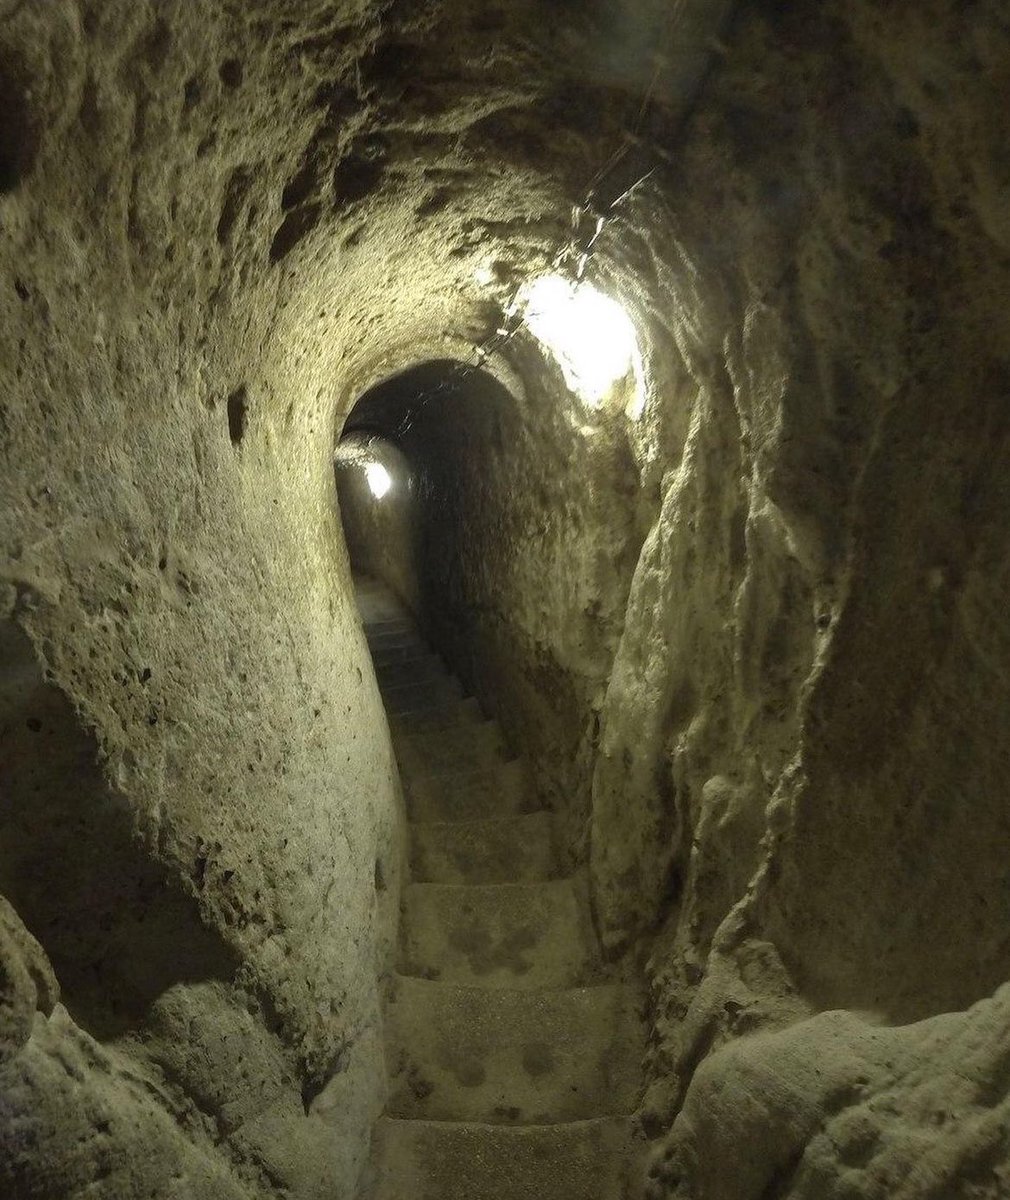 A Turkish homeowner chasing his chickens through a hole in his basement during renovations came across an abandoned underground Turkish city that once housed 20,000 people. Excavation work uncovered an incredible marvel of engineering, a network of tunnels and shelters 18 levels…